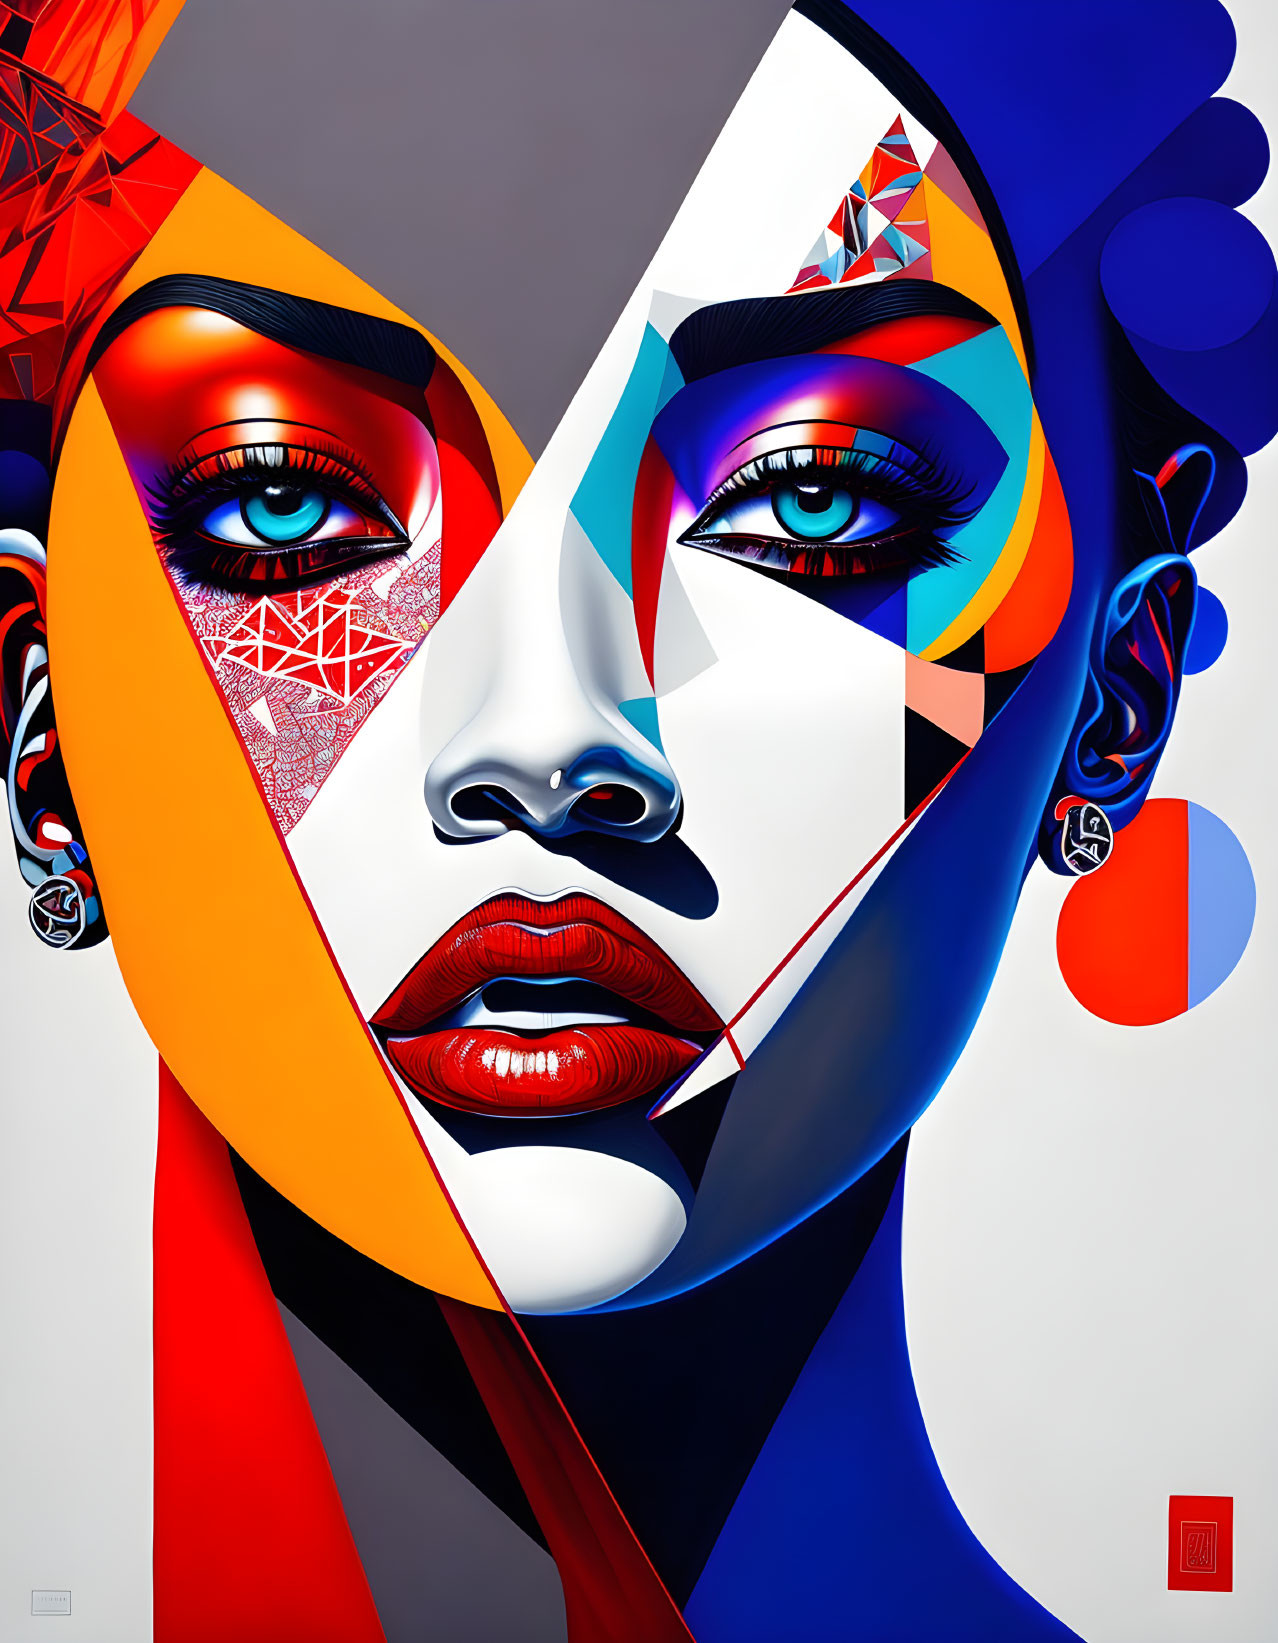 face with abstract geometric